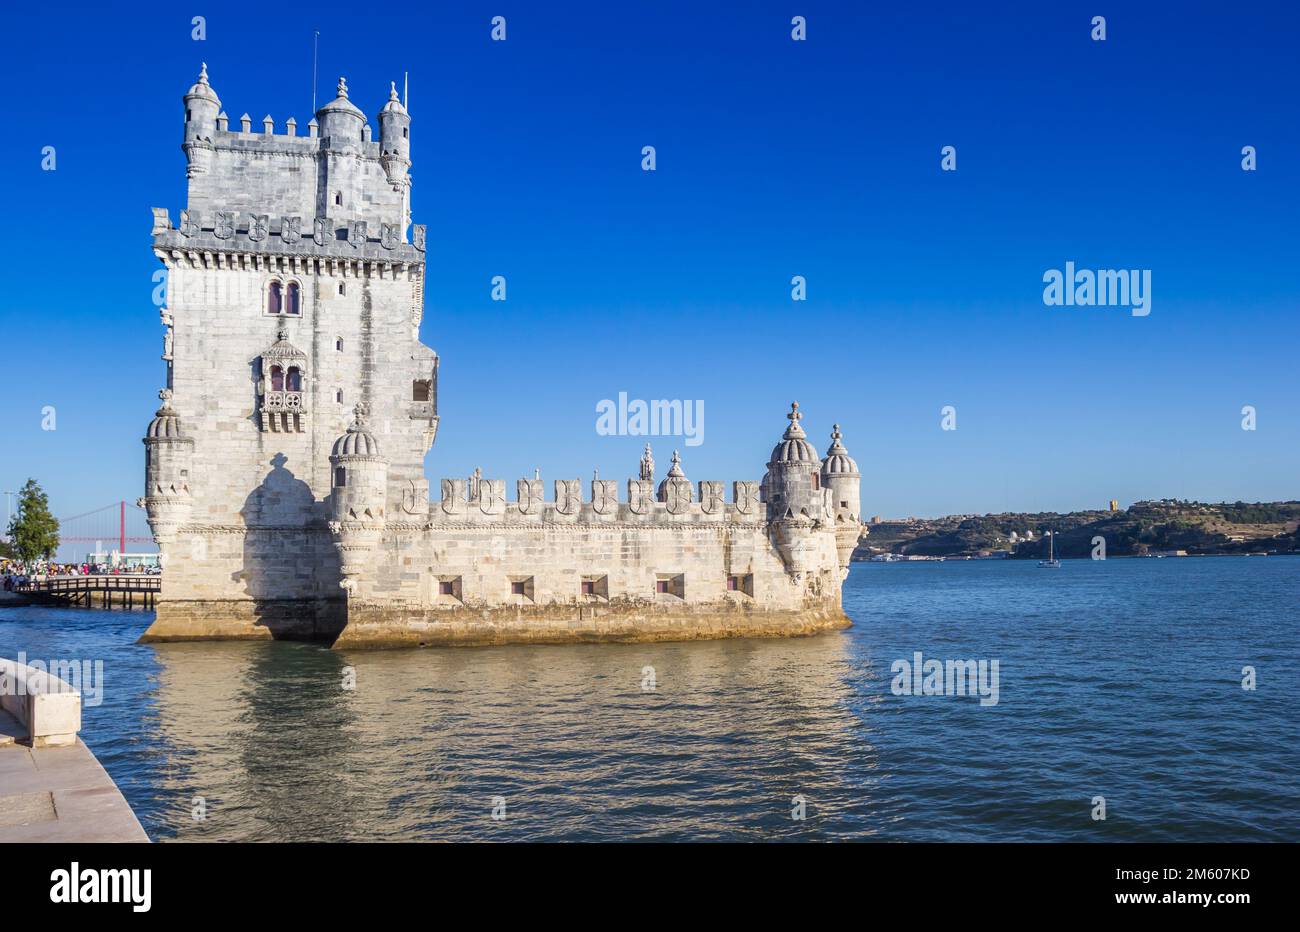 Historic Belem tower at the waterfront in Lisbon, Portugal Stock Photo